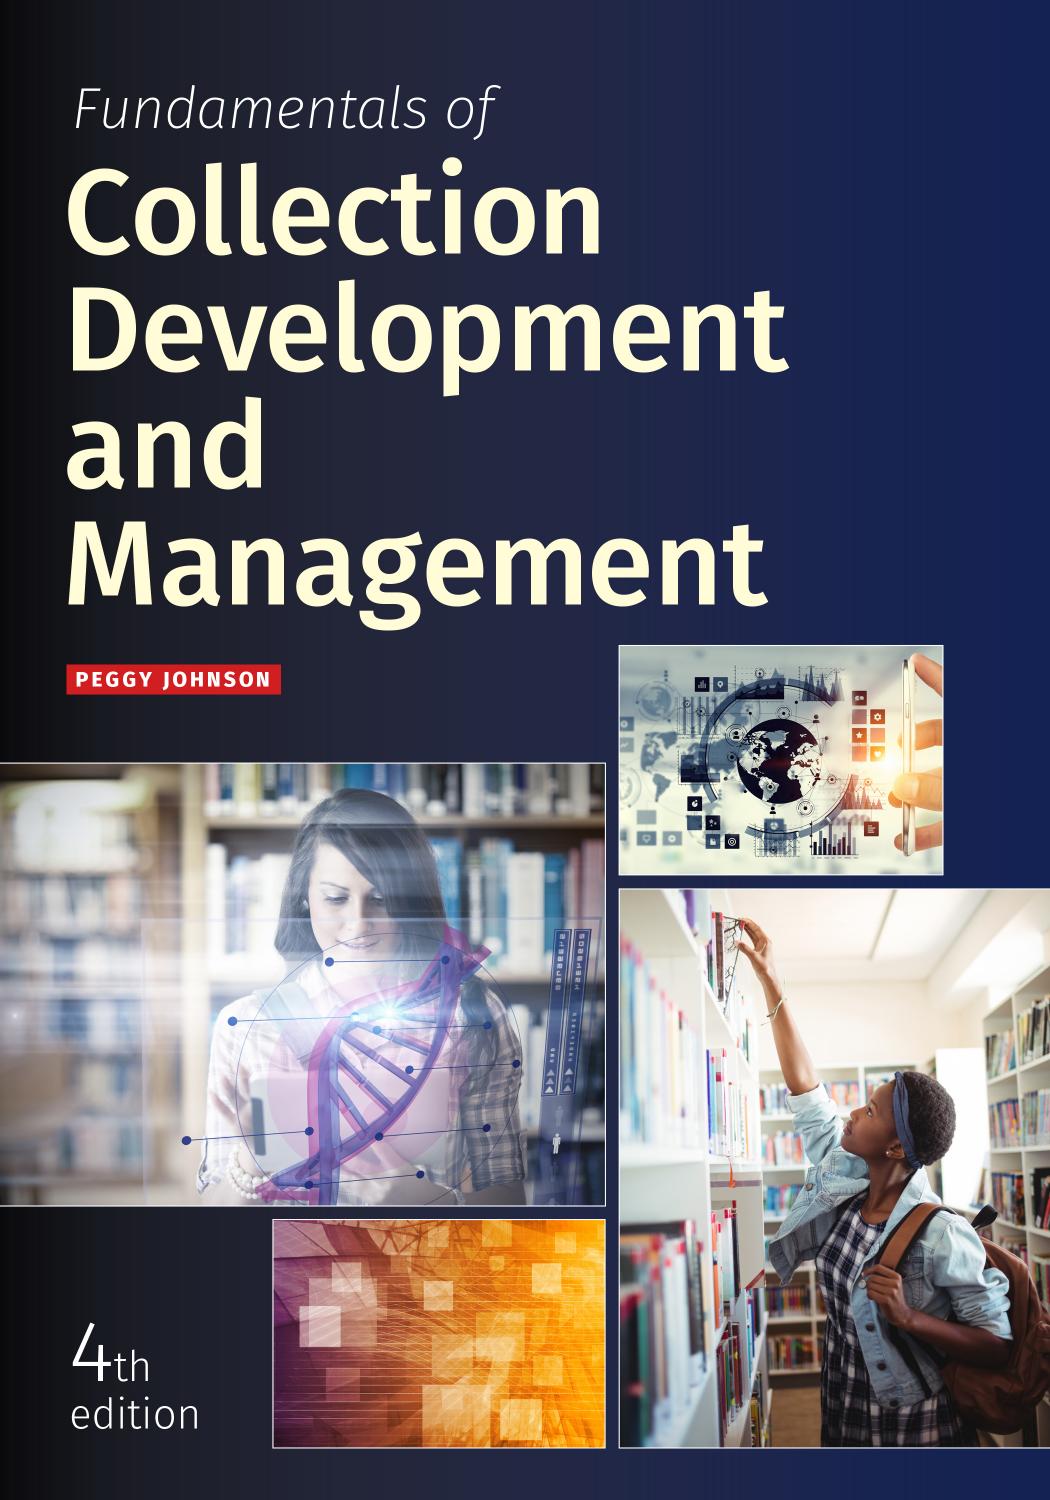 Fundamentals of Collection Development and Management, 4th Edition by Peggy Johnson